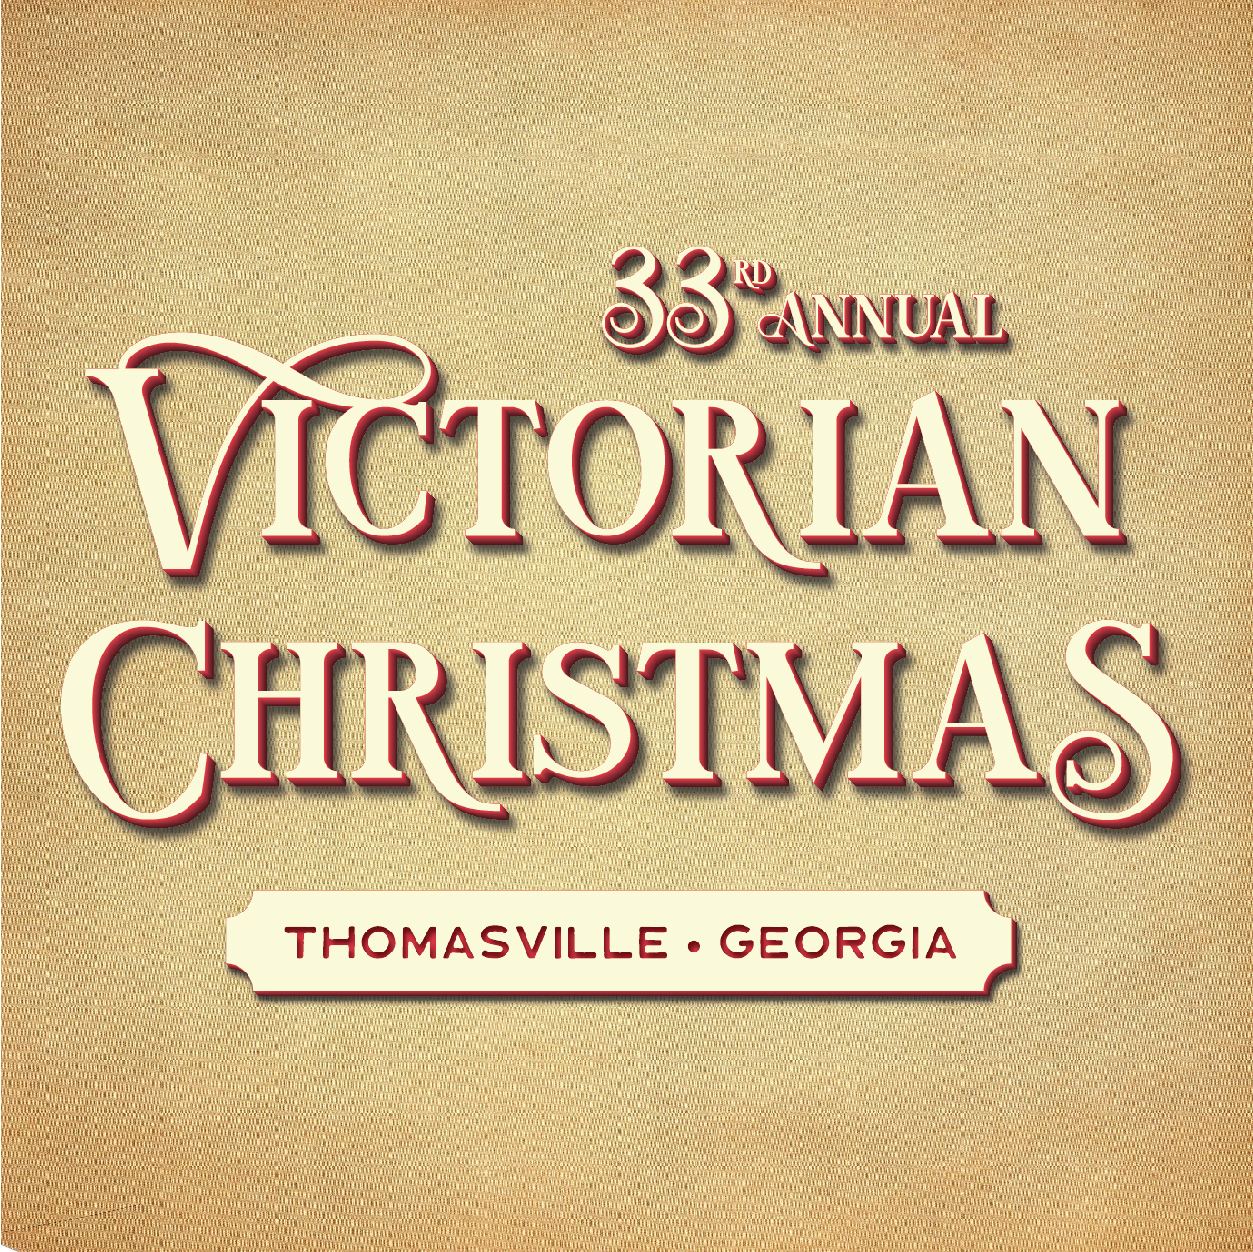 Photo for 33rd ANNUAL VICTORIAN CHRISTMAS TO BE HELD IN DOWNTOWN THOMASVILLE DECEMBER 12th AND 13th